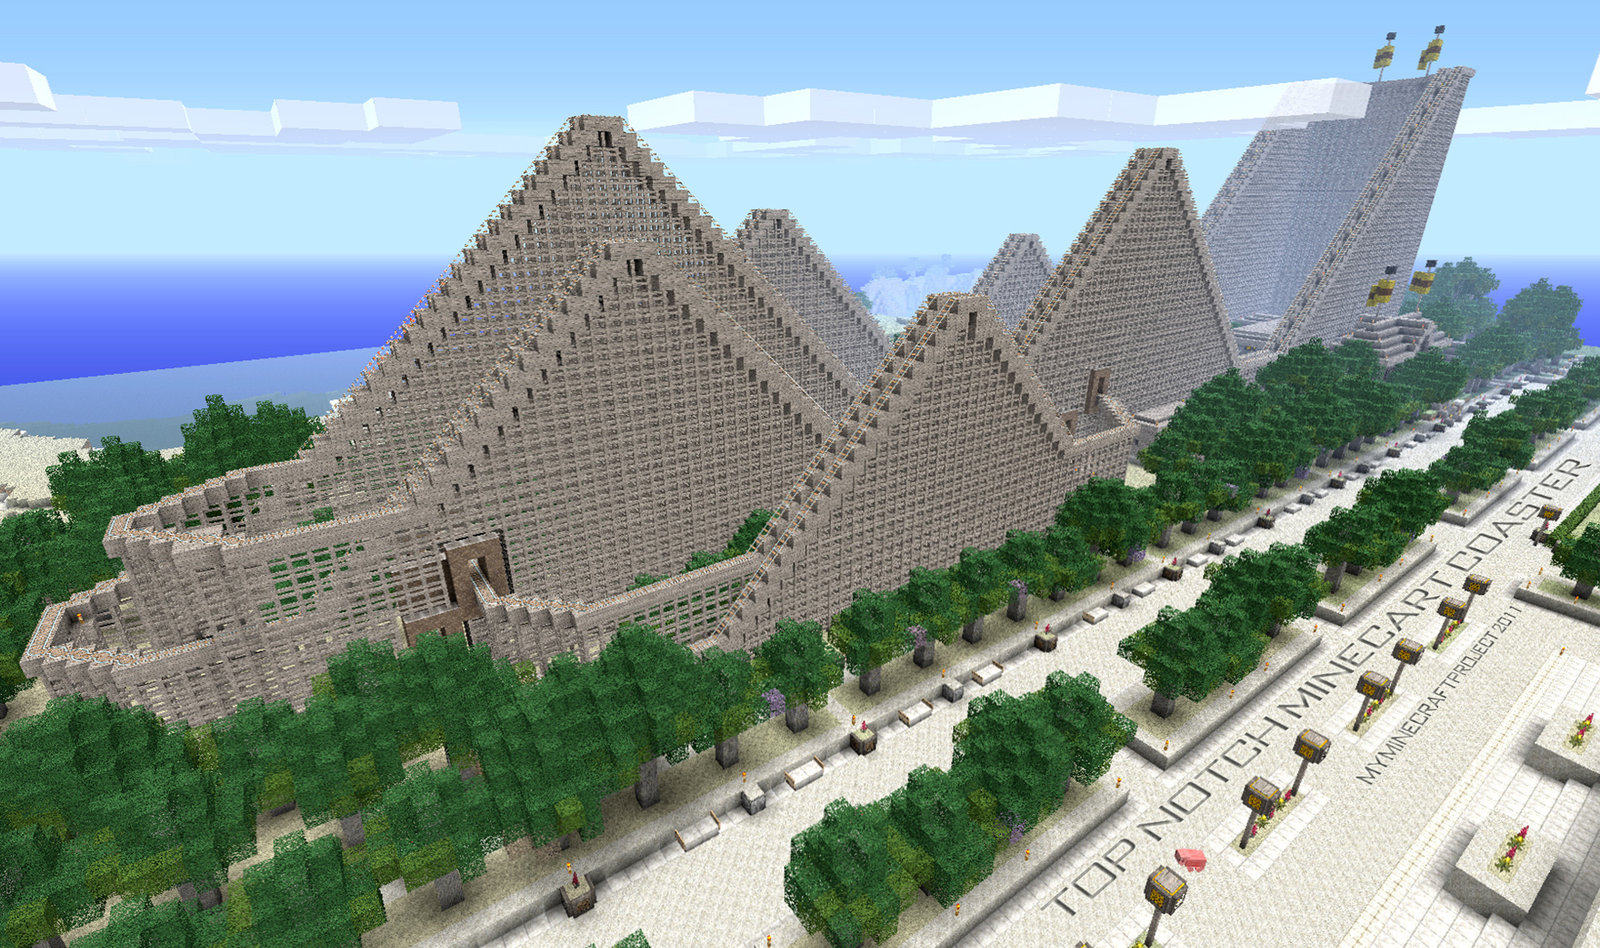 InSanity lurks Inside: Minecraft Theme Park Coming to New York Soon?